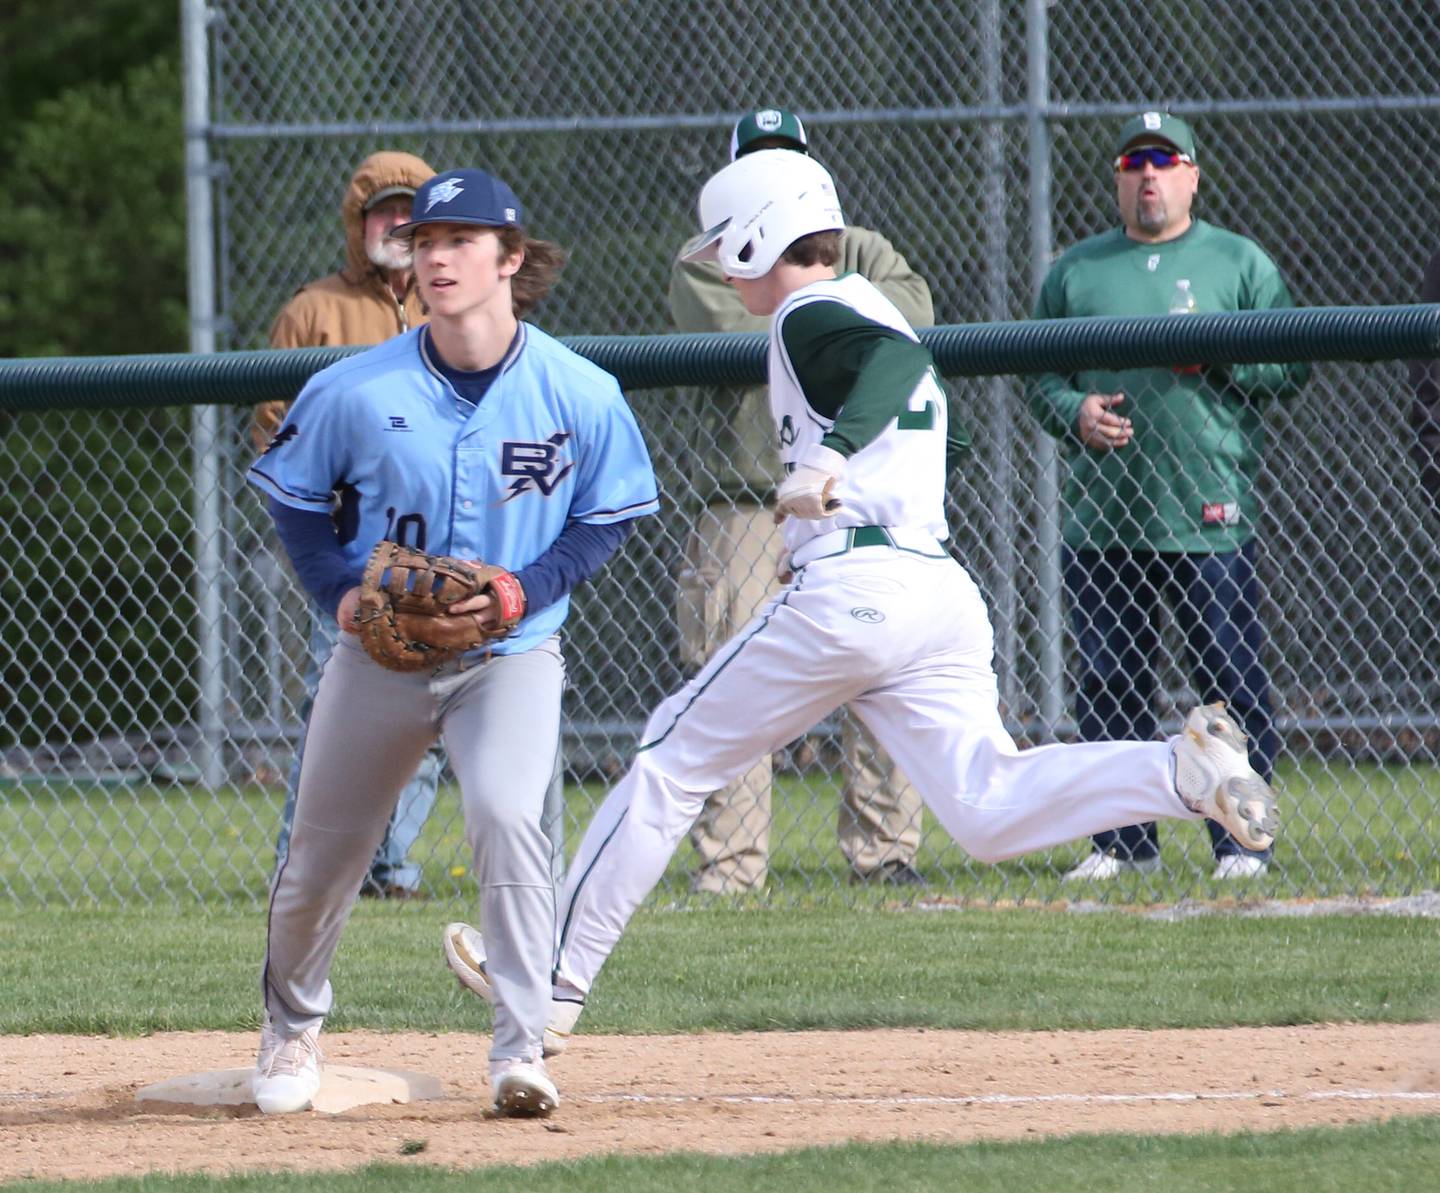 Bureau Valley's Sam Wright catches the ball at first base to force out St. Bede's Guss Burr on Monday, May 1, 2023 at St. Bede Academy.